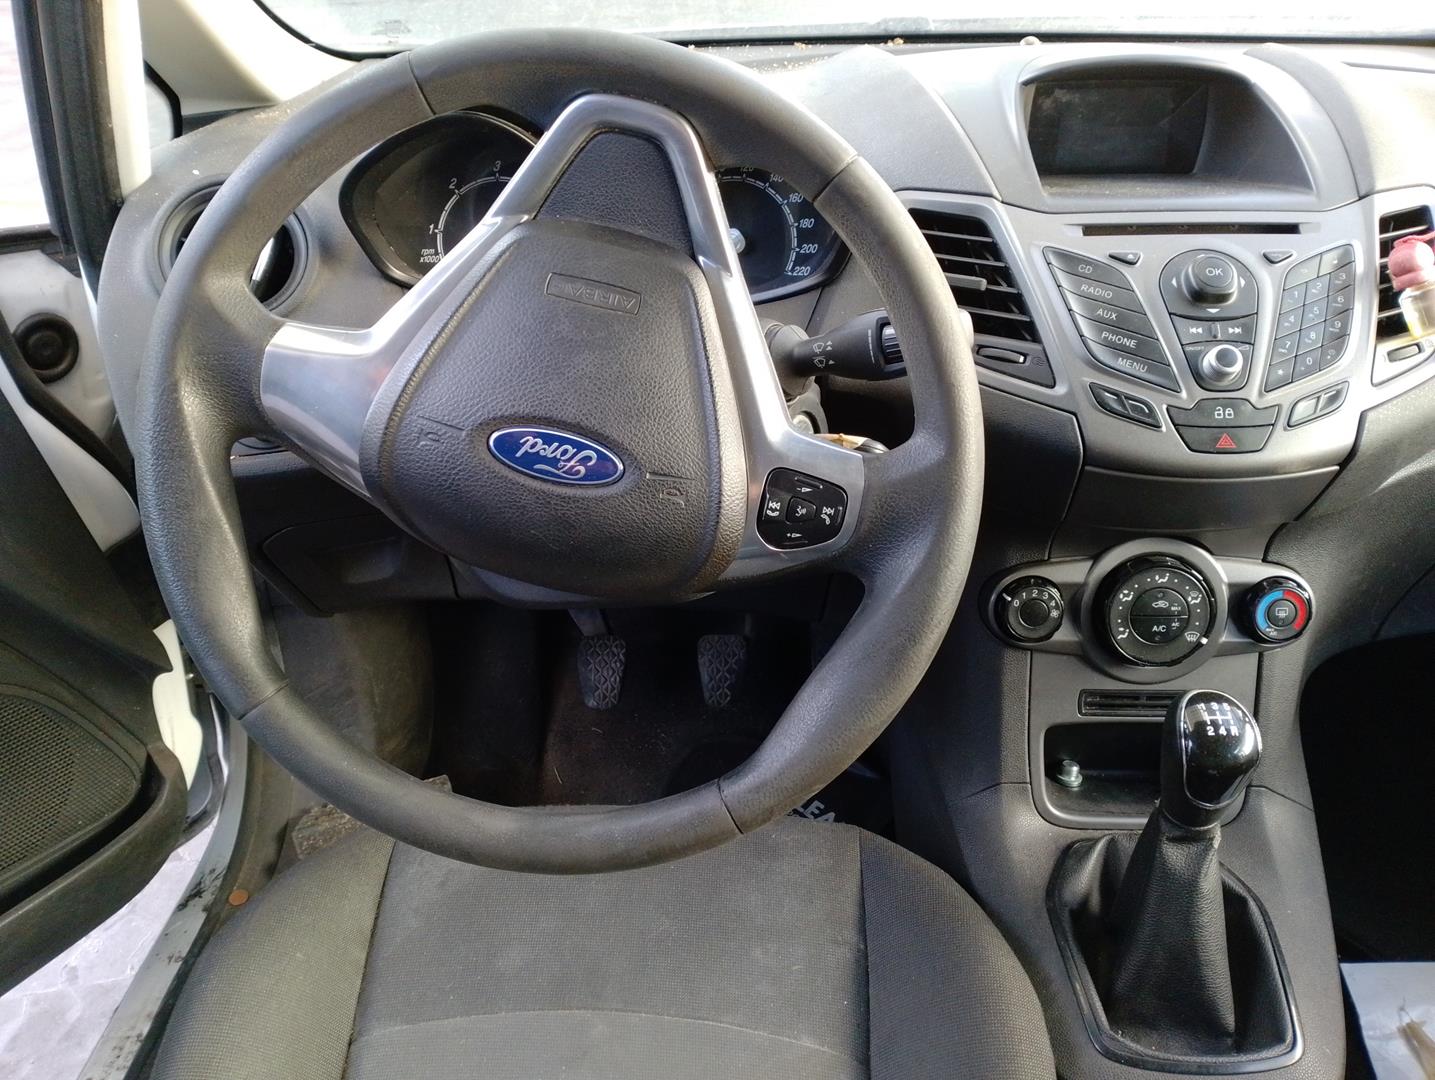 FORD Fiesta 5 generation (2001-2010) Other Interior Parts DN1T18B955BA 24200349